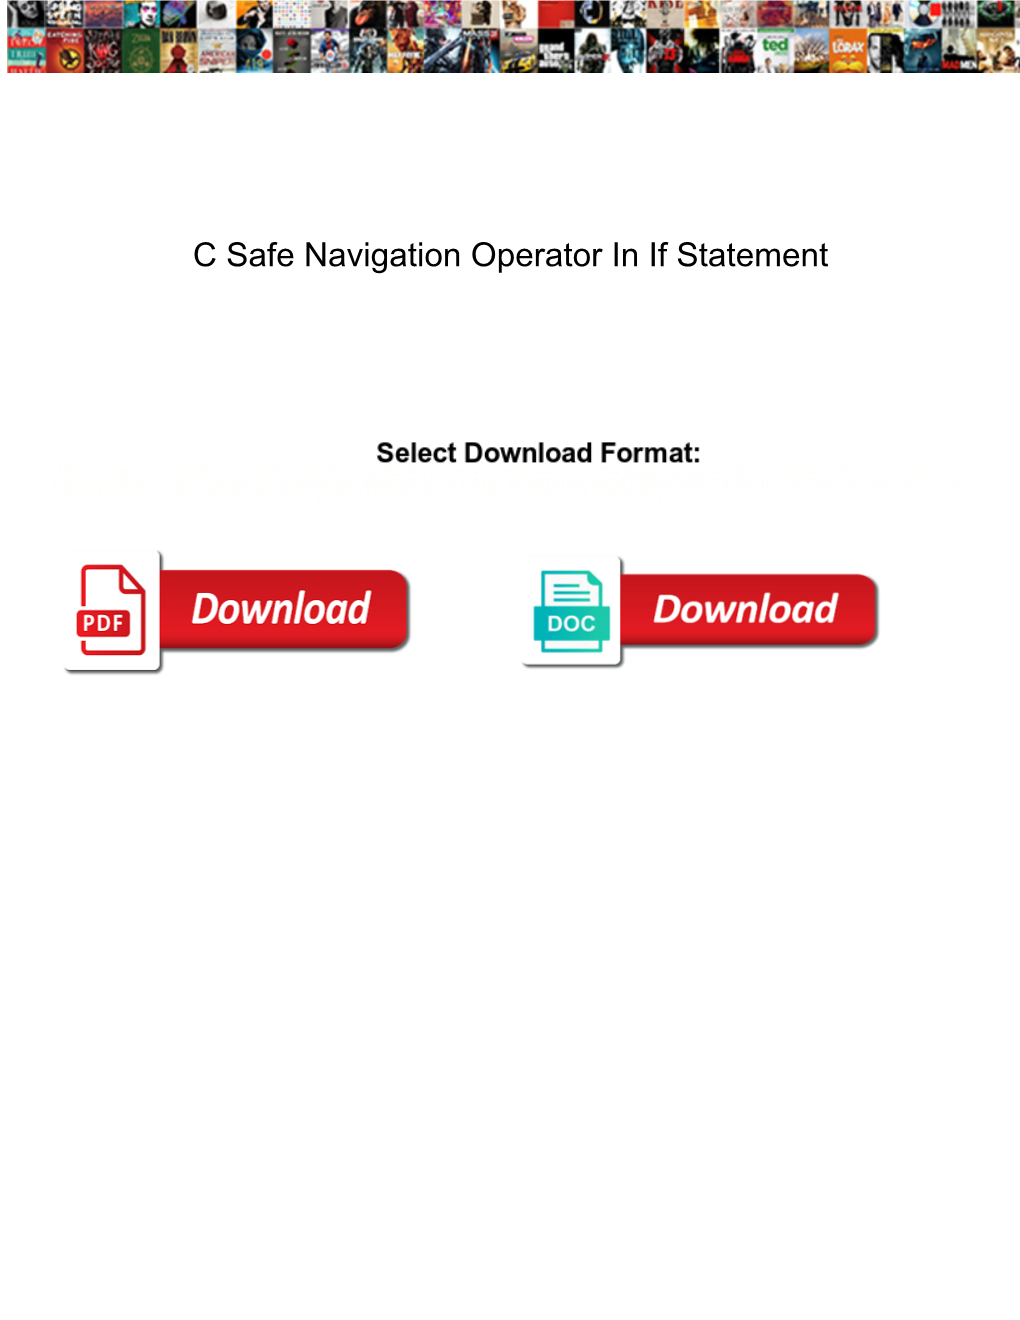 C Safe Navigation Operator in If Statement